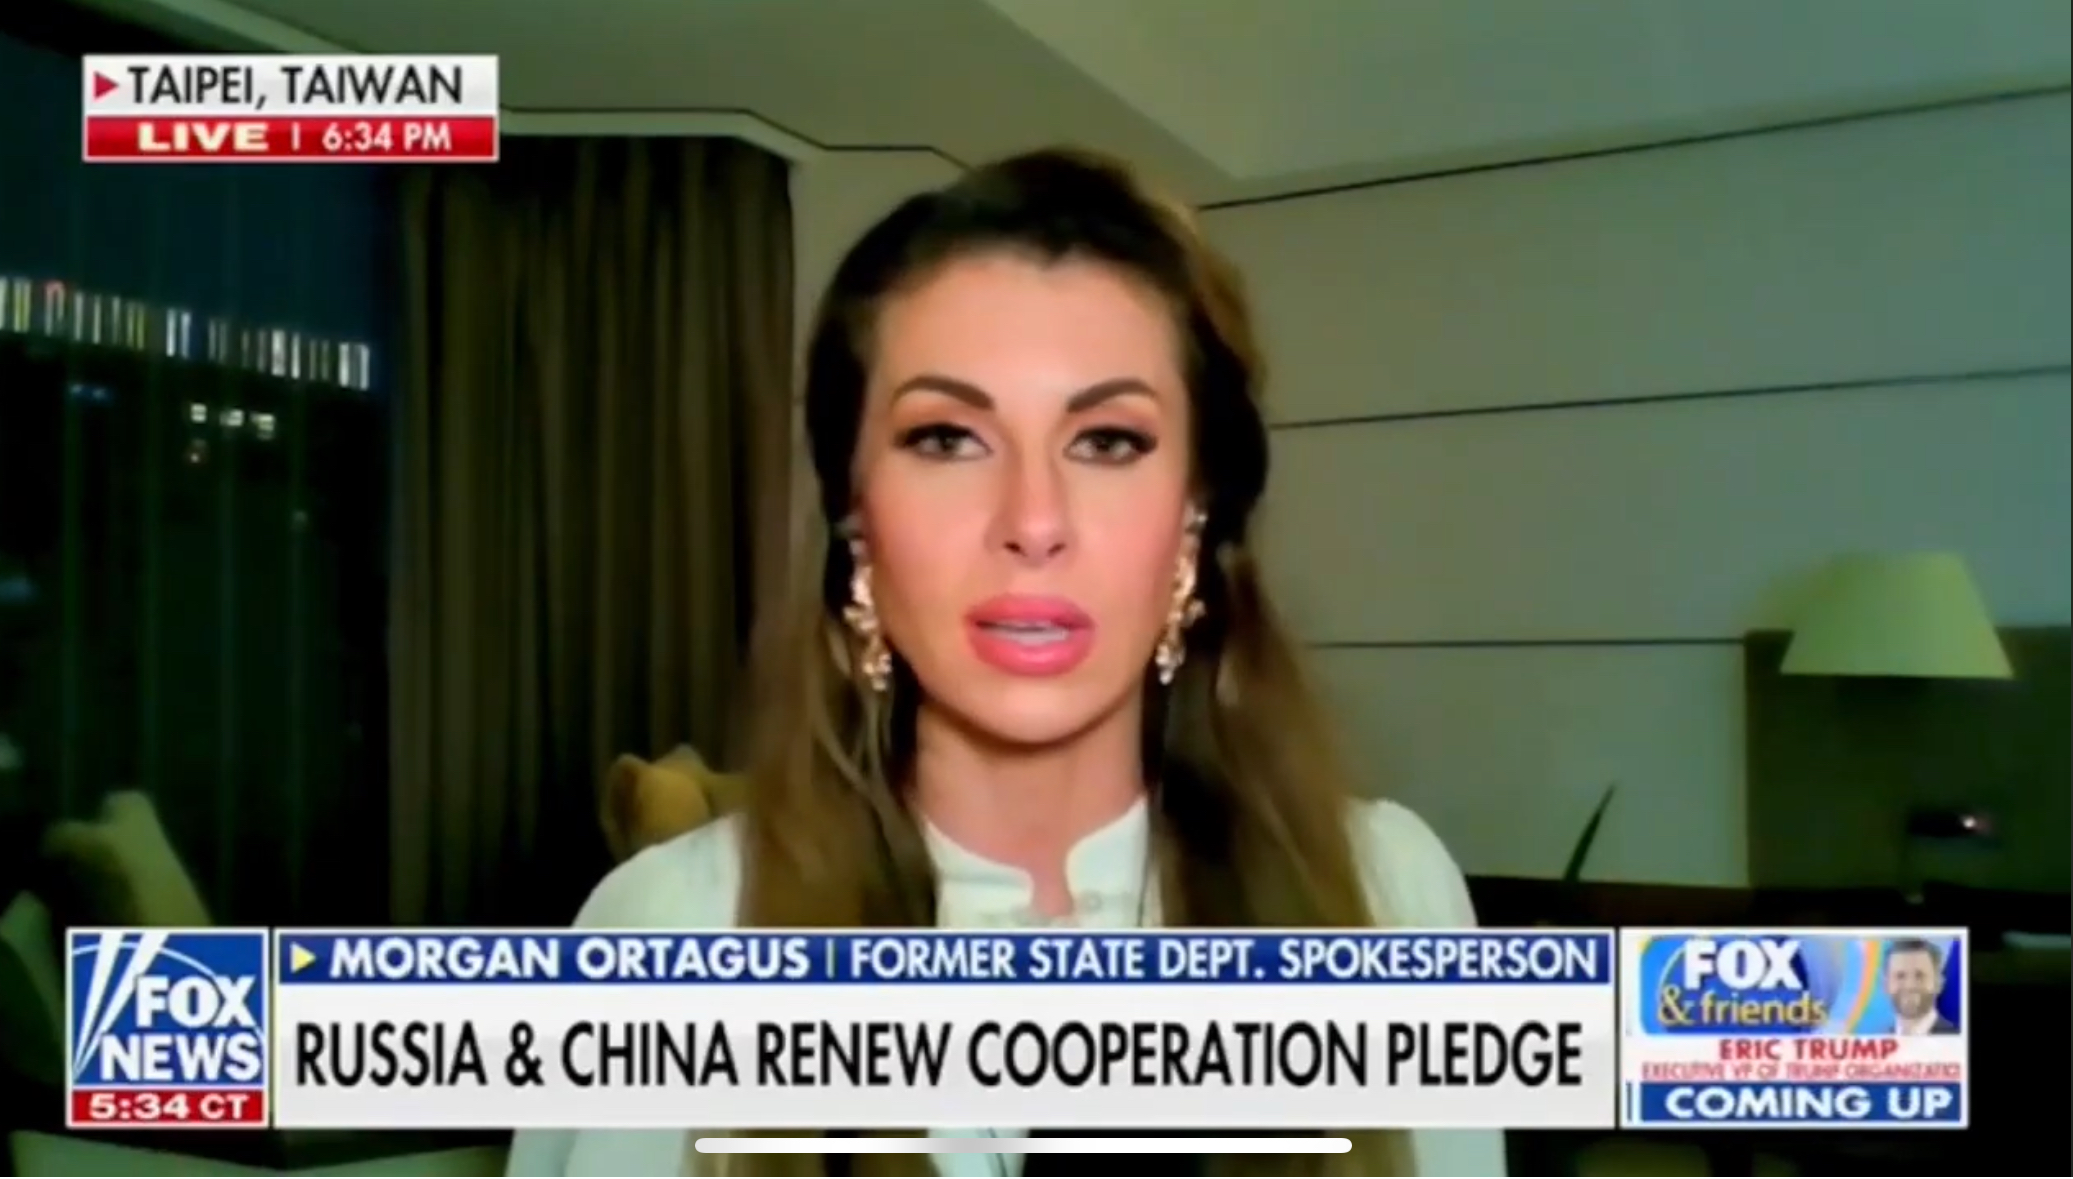 Morgan Ortagus joins Fox and Friends LIVE from Taiwan